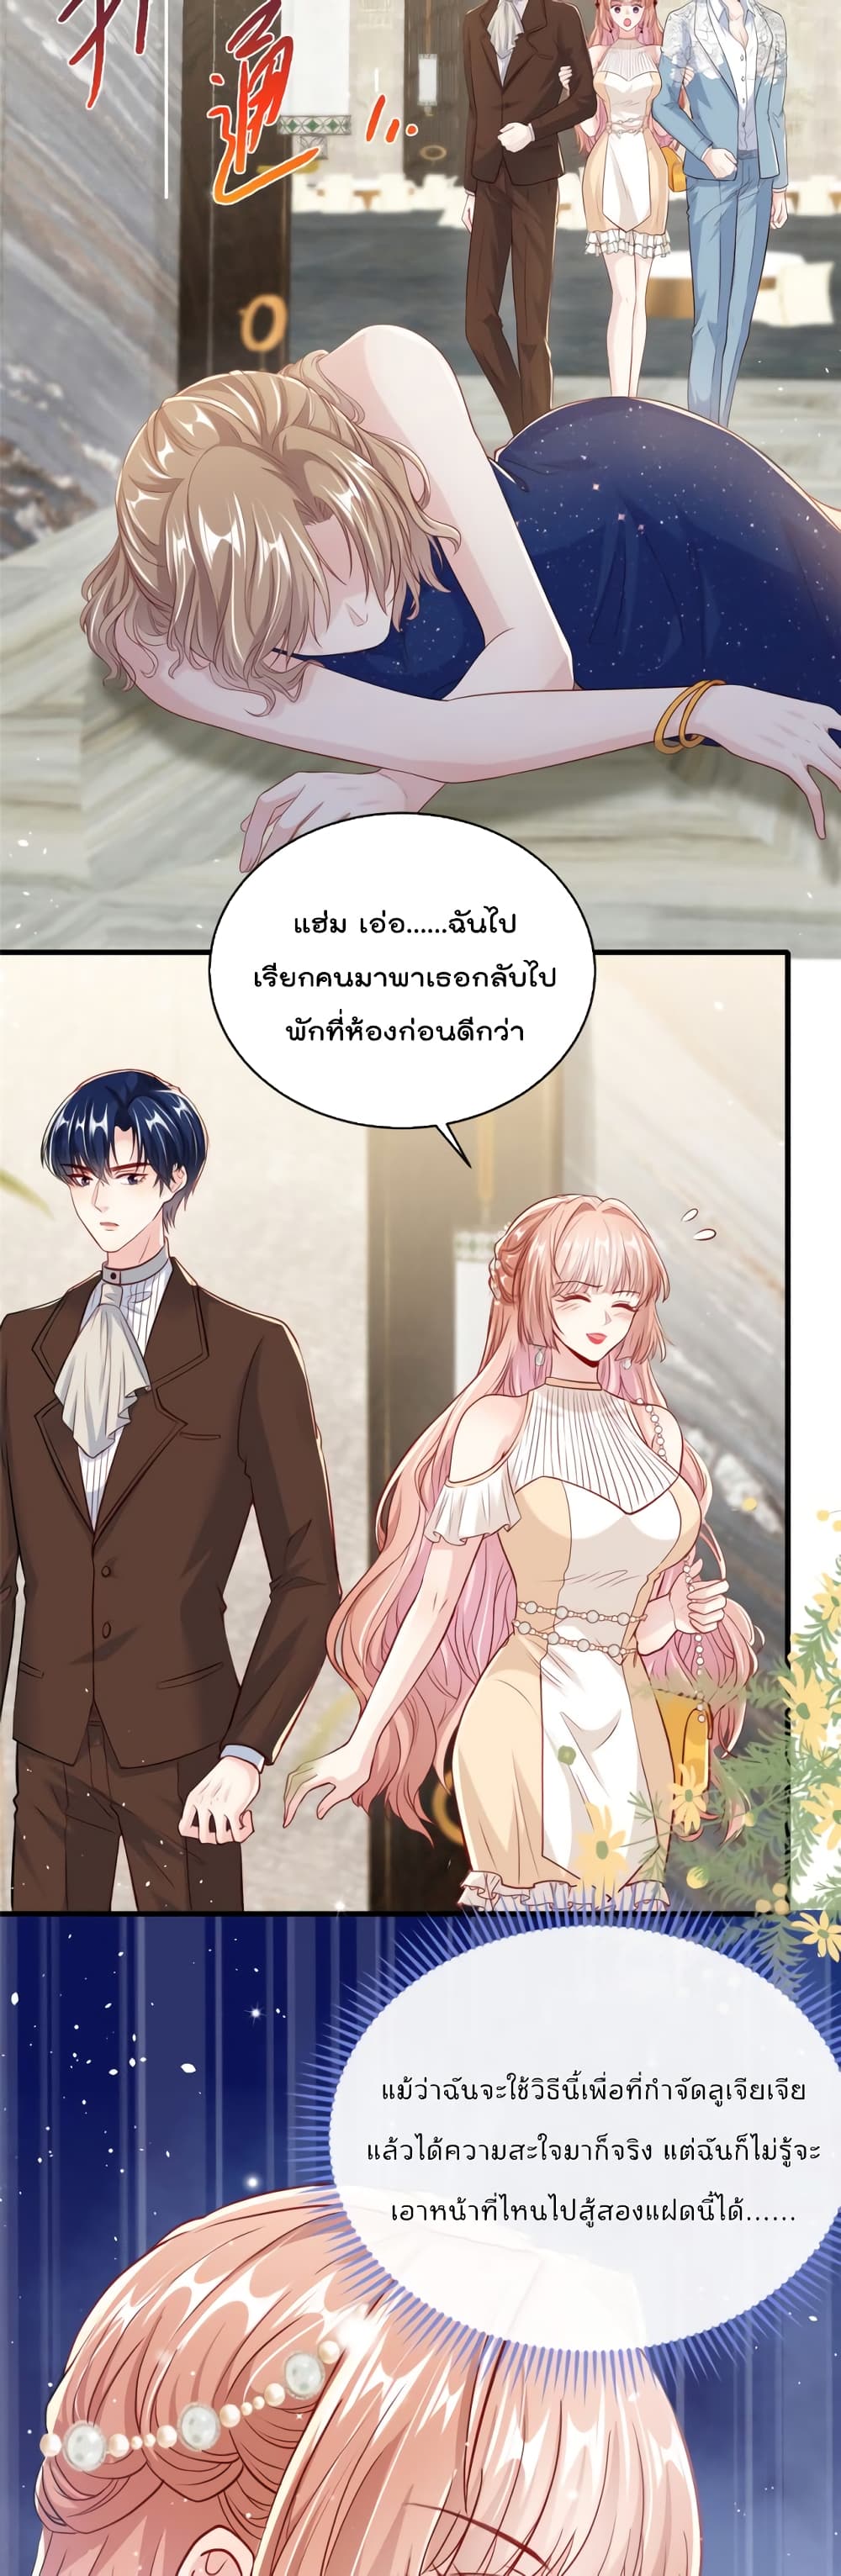 Find Me In Your Meory ตอนที่ 40 (12)